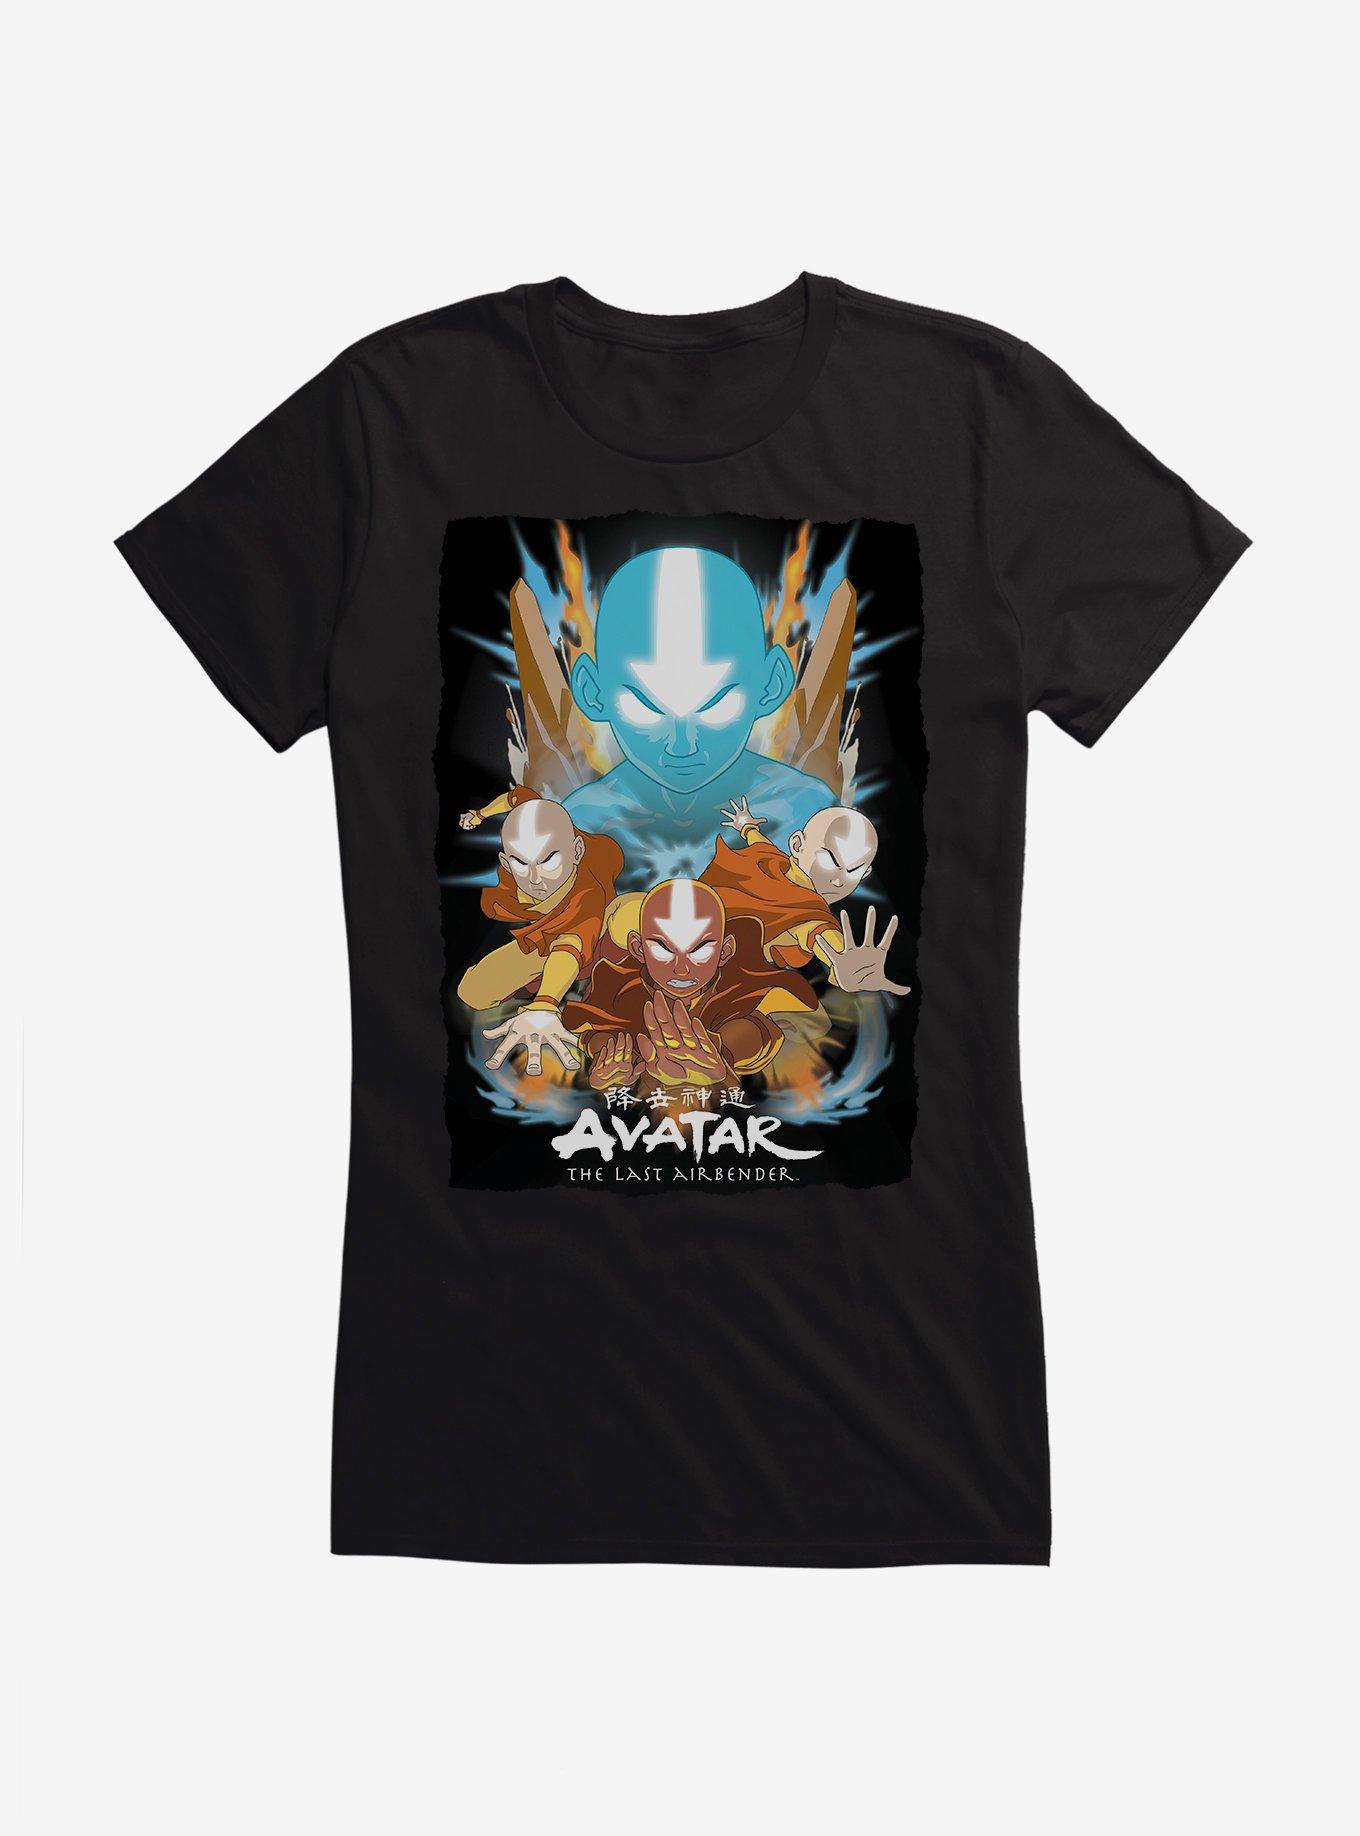 Avatar: The Last Airbender Aang Master Of All Elements Girls T-Shirt, BLACK, hi-res